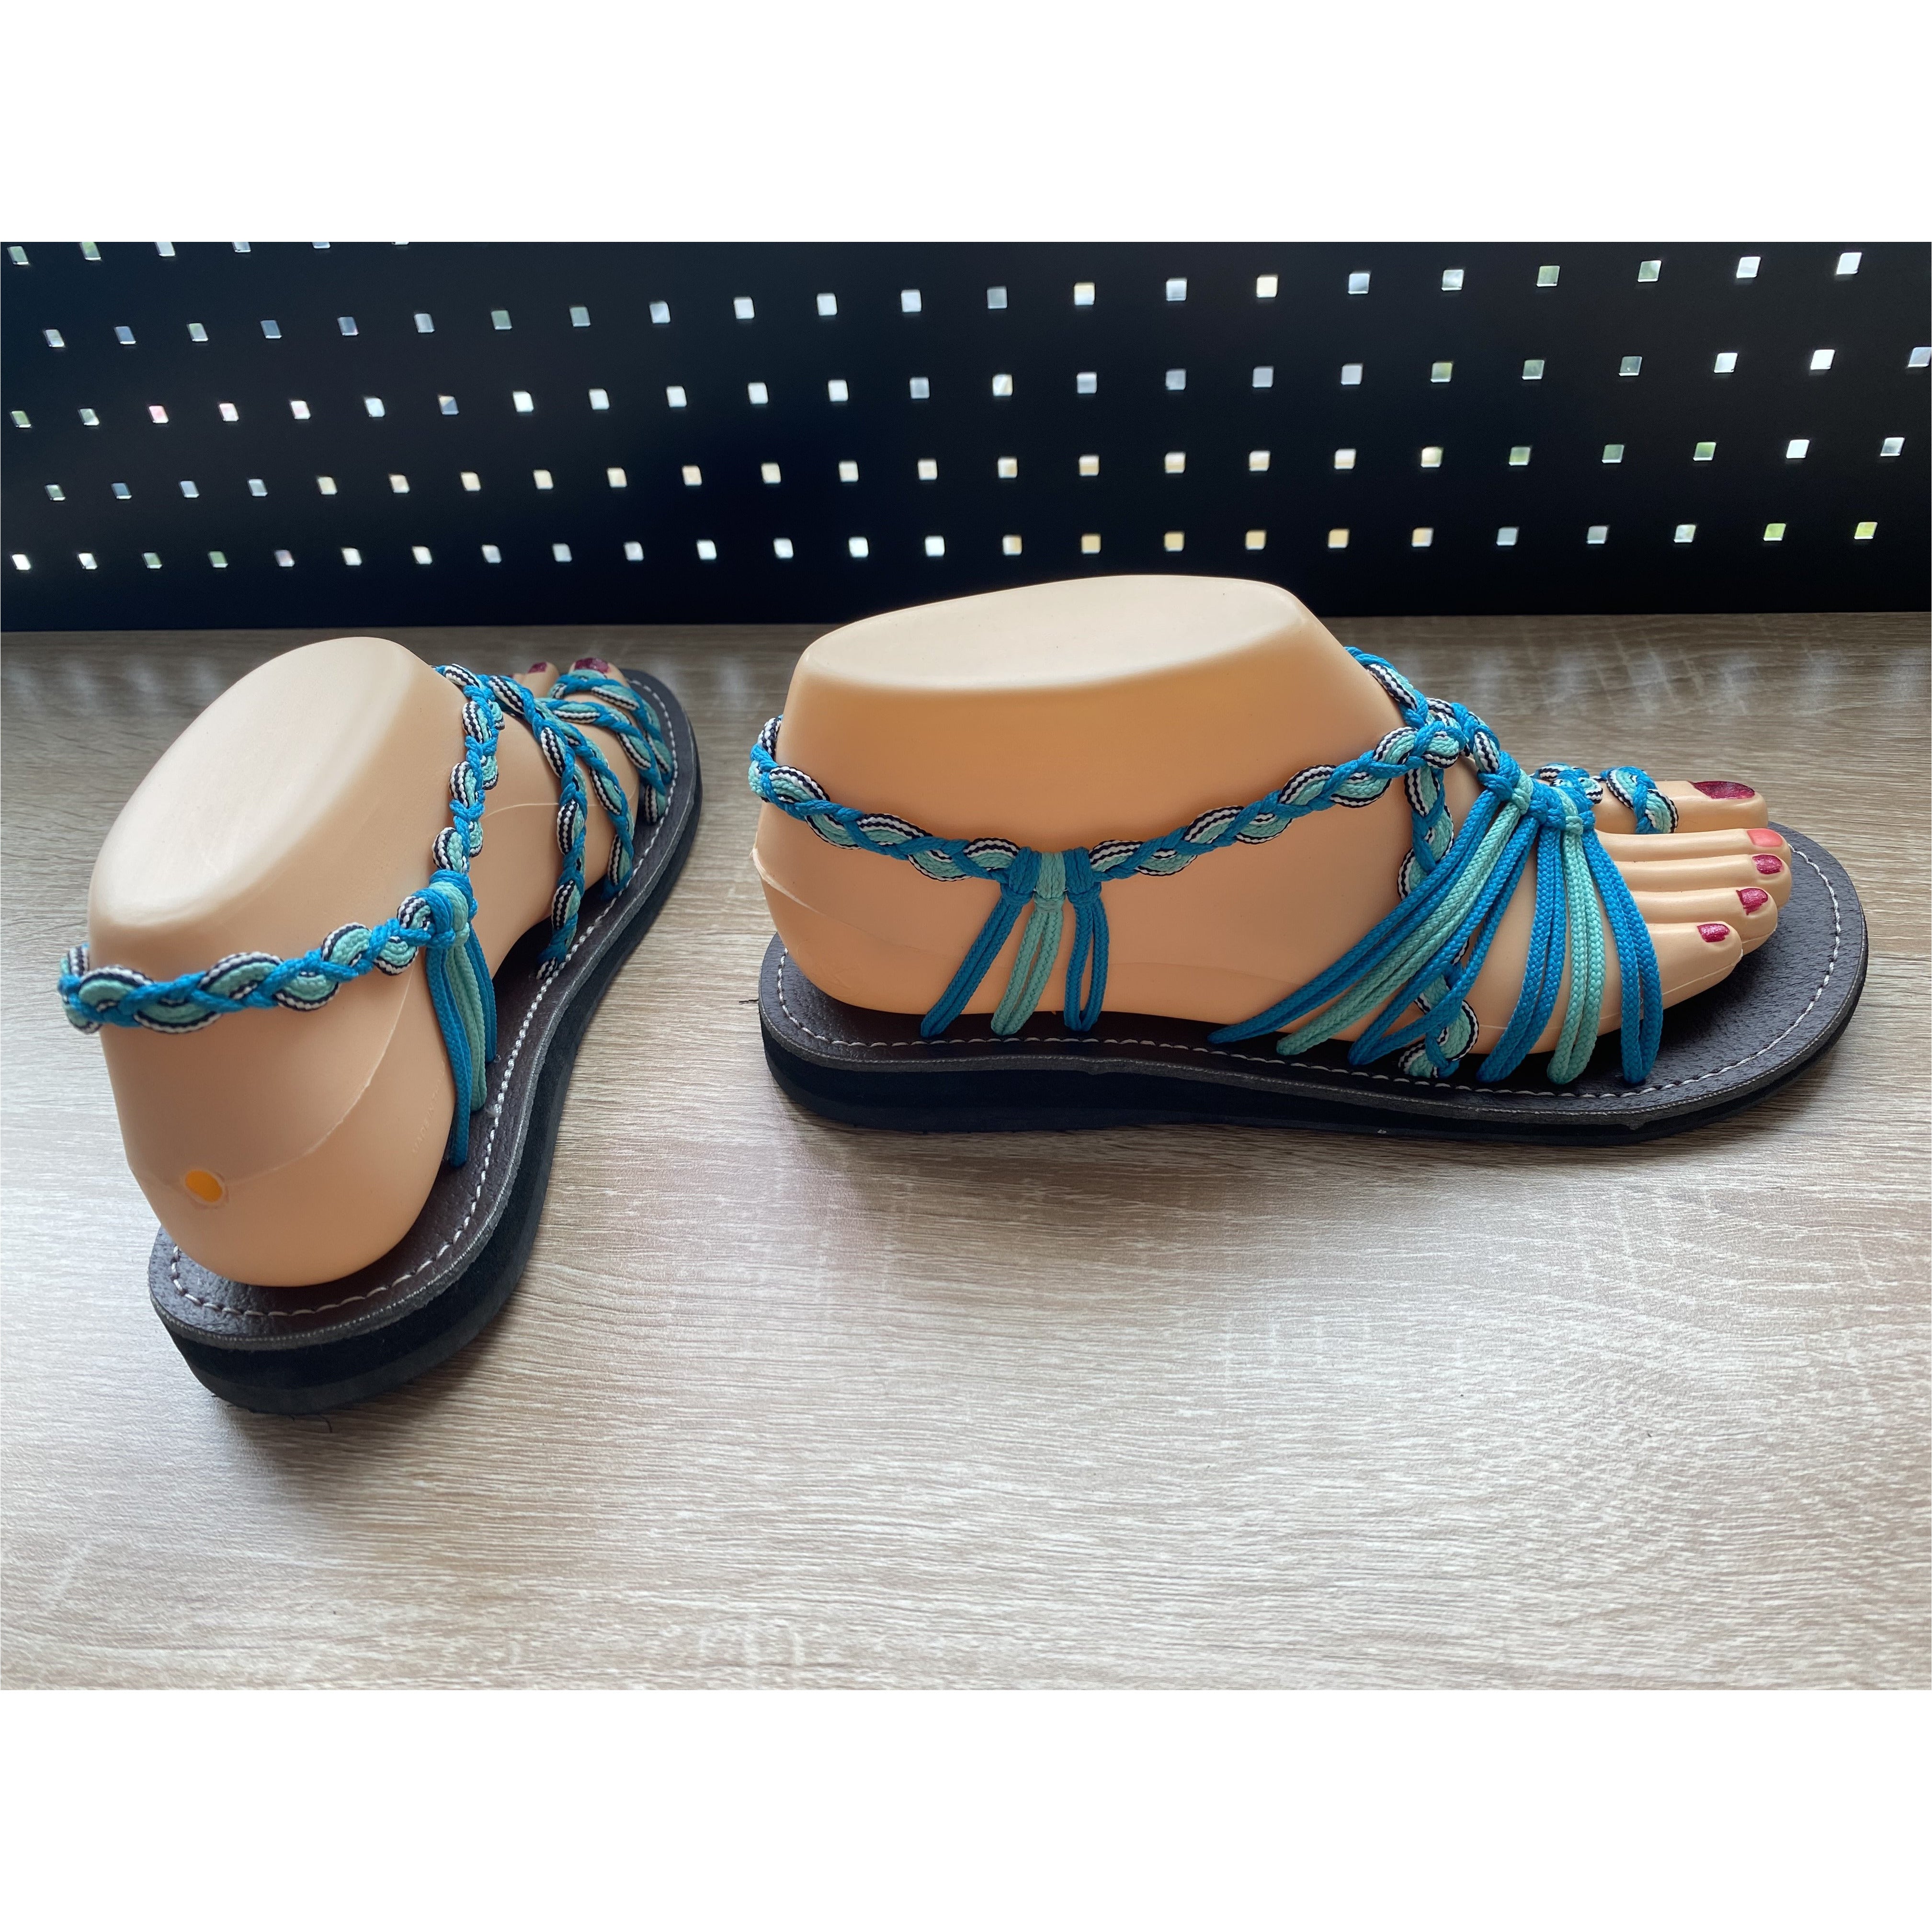 Shoes - Braided Sandal BLUE/TEAL